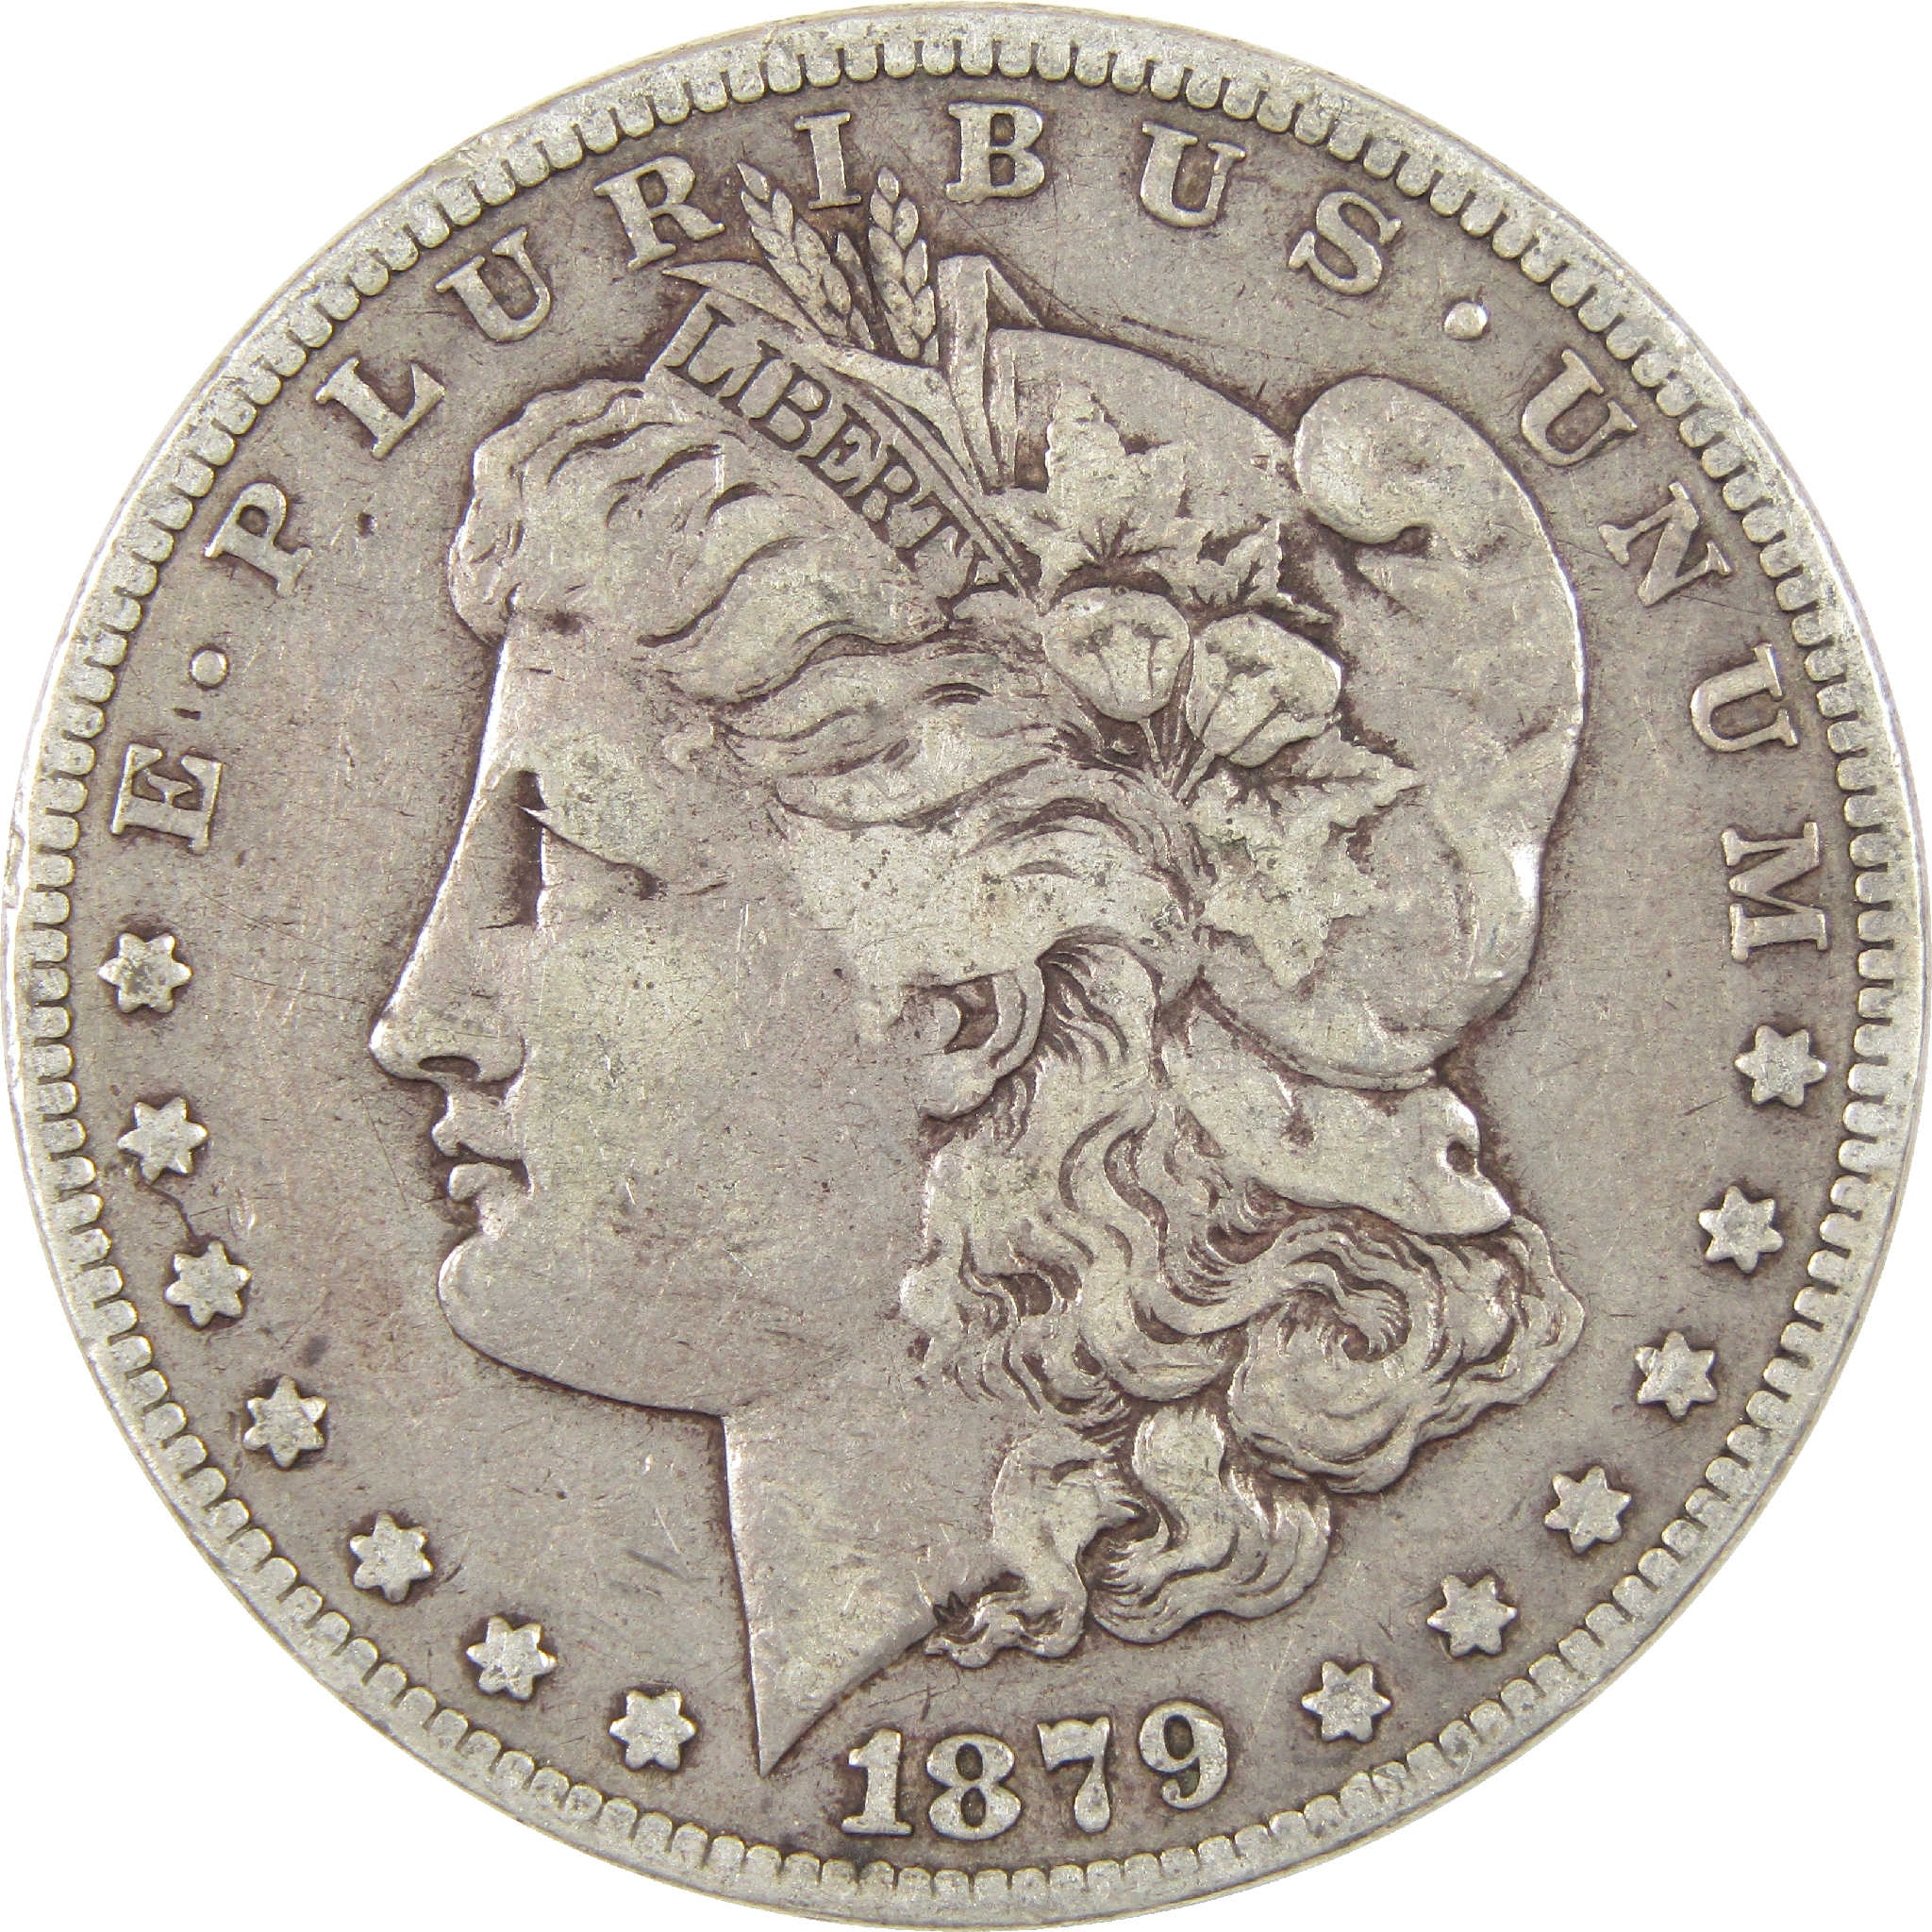 1879 S Rev 78 Morgan Dollar F Fine Details Silver $1 Coin SKU:I11259 - Morgan coin - Morgan silver dollar - Morgan silver dollar for sale - Profile Coins &amp; Collectibles